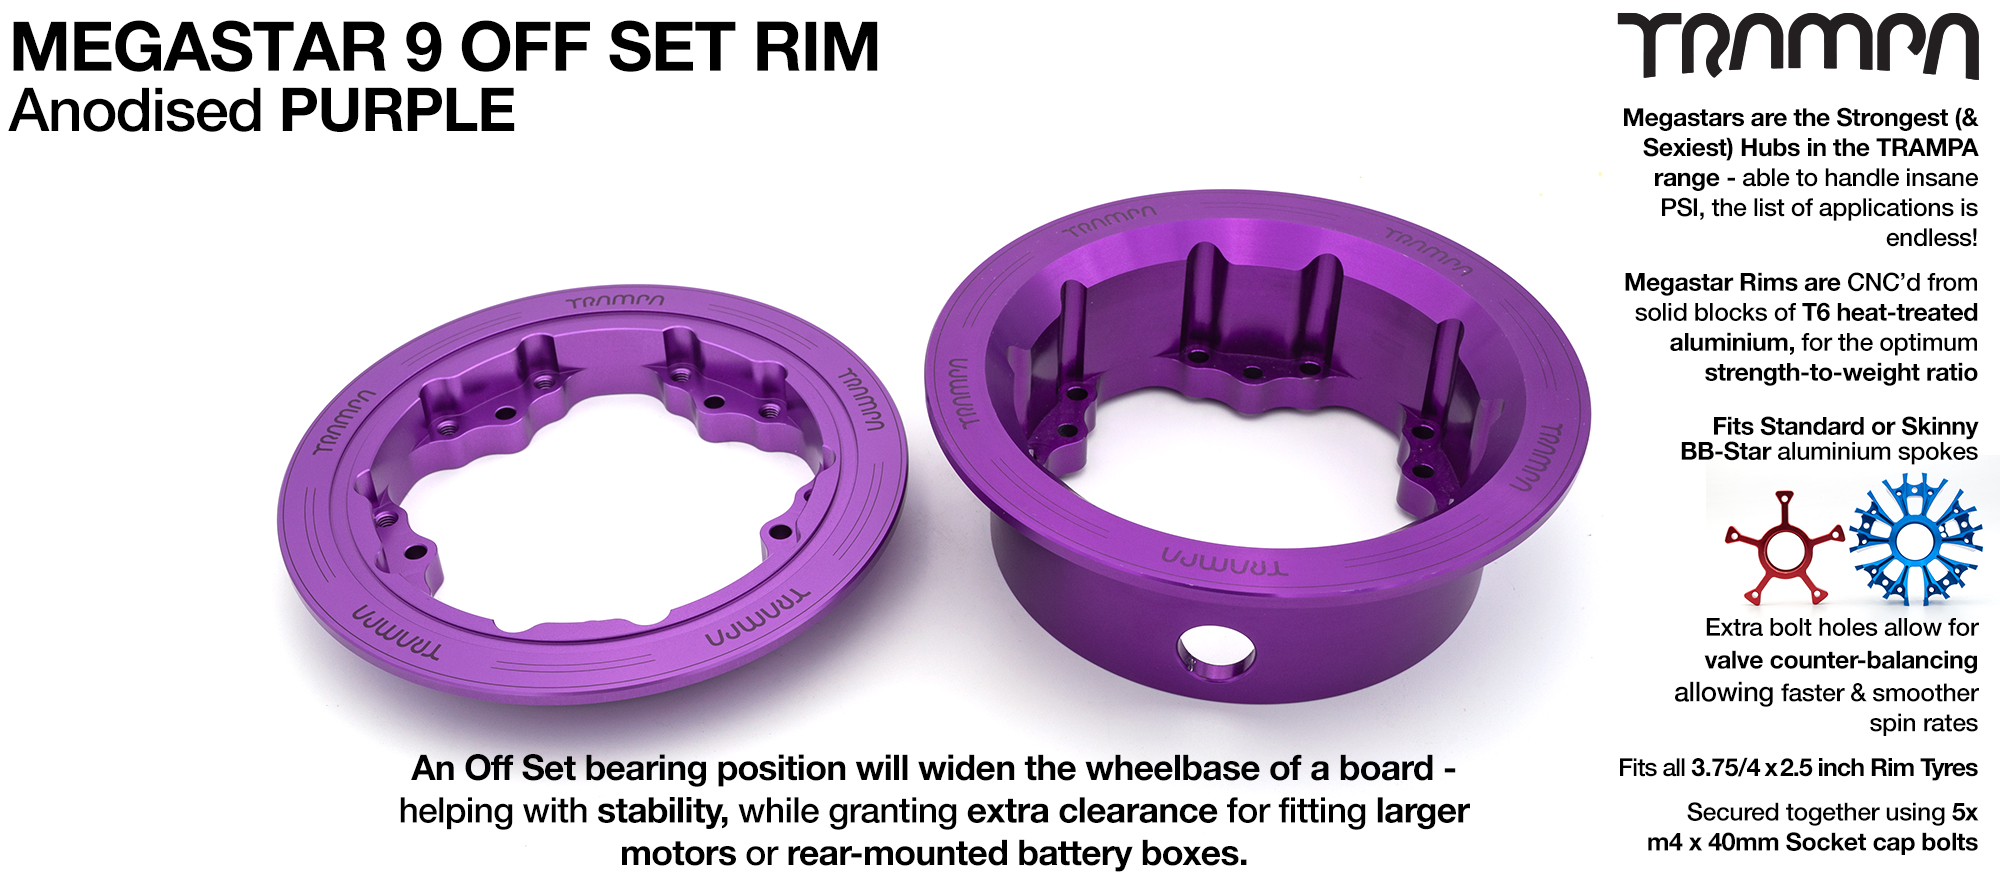 MEGASTAR 9 Rims Measure 3.75/4x 2.5 Inch & the bearings are positioned OFF-SET & accept 3.75 & 4 Inch Rim Tyres - PURPLE